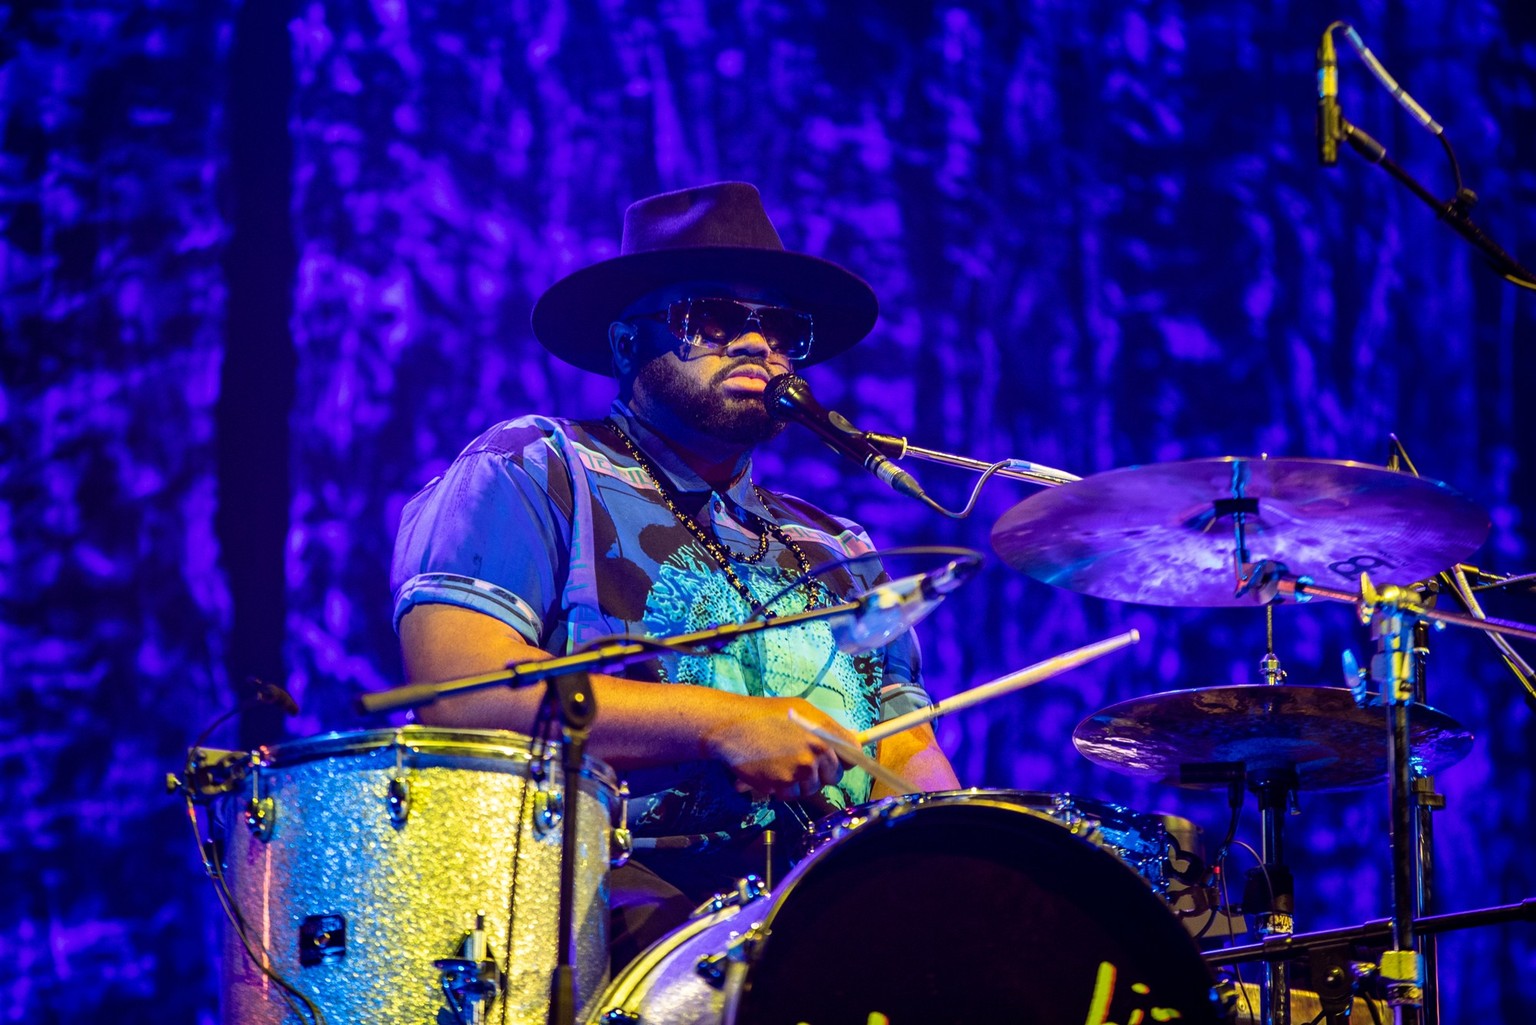 Drummer Donald &quot;DJ&quot; Johnson of American band Khruangbin performs at Afas Live, Amsterdam, Netherlands 12th April 2022. (Photo by Paul Bergen/Redferns)